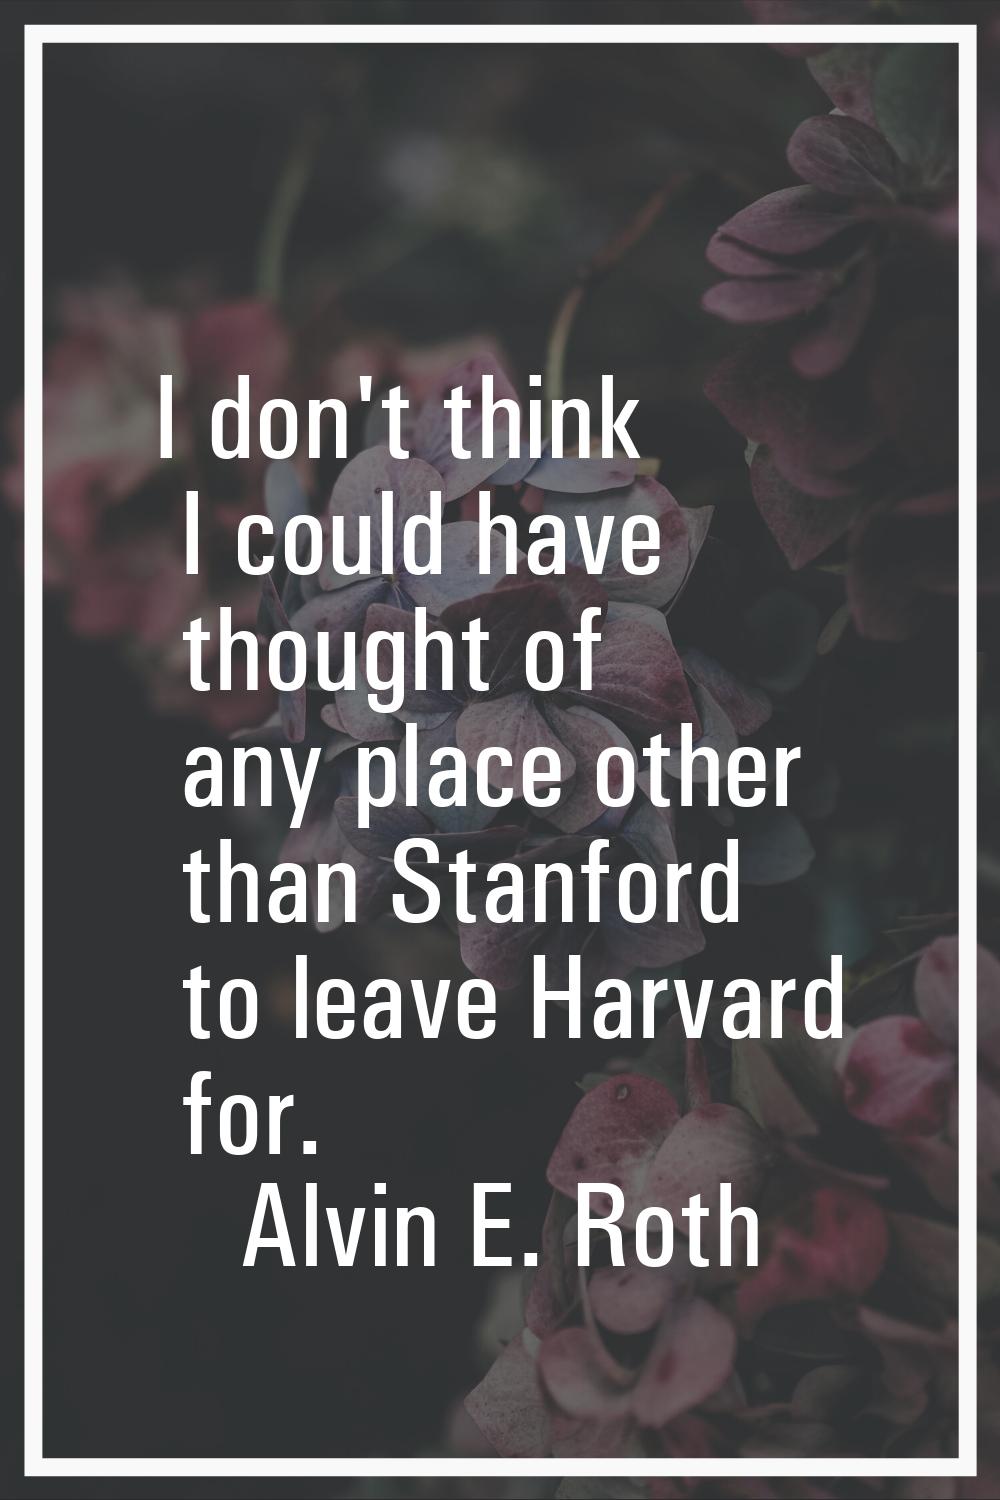 I don't think I could have thought of any place other than Stanford to leave Harvard for.